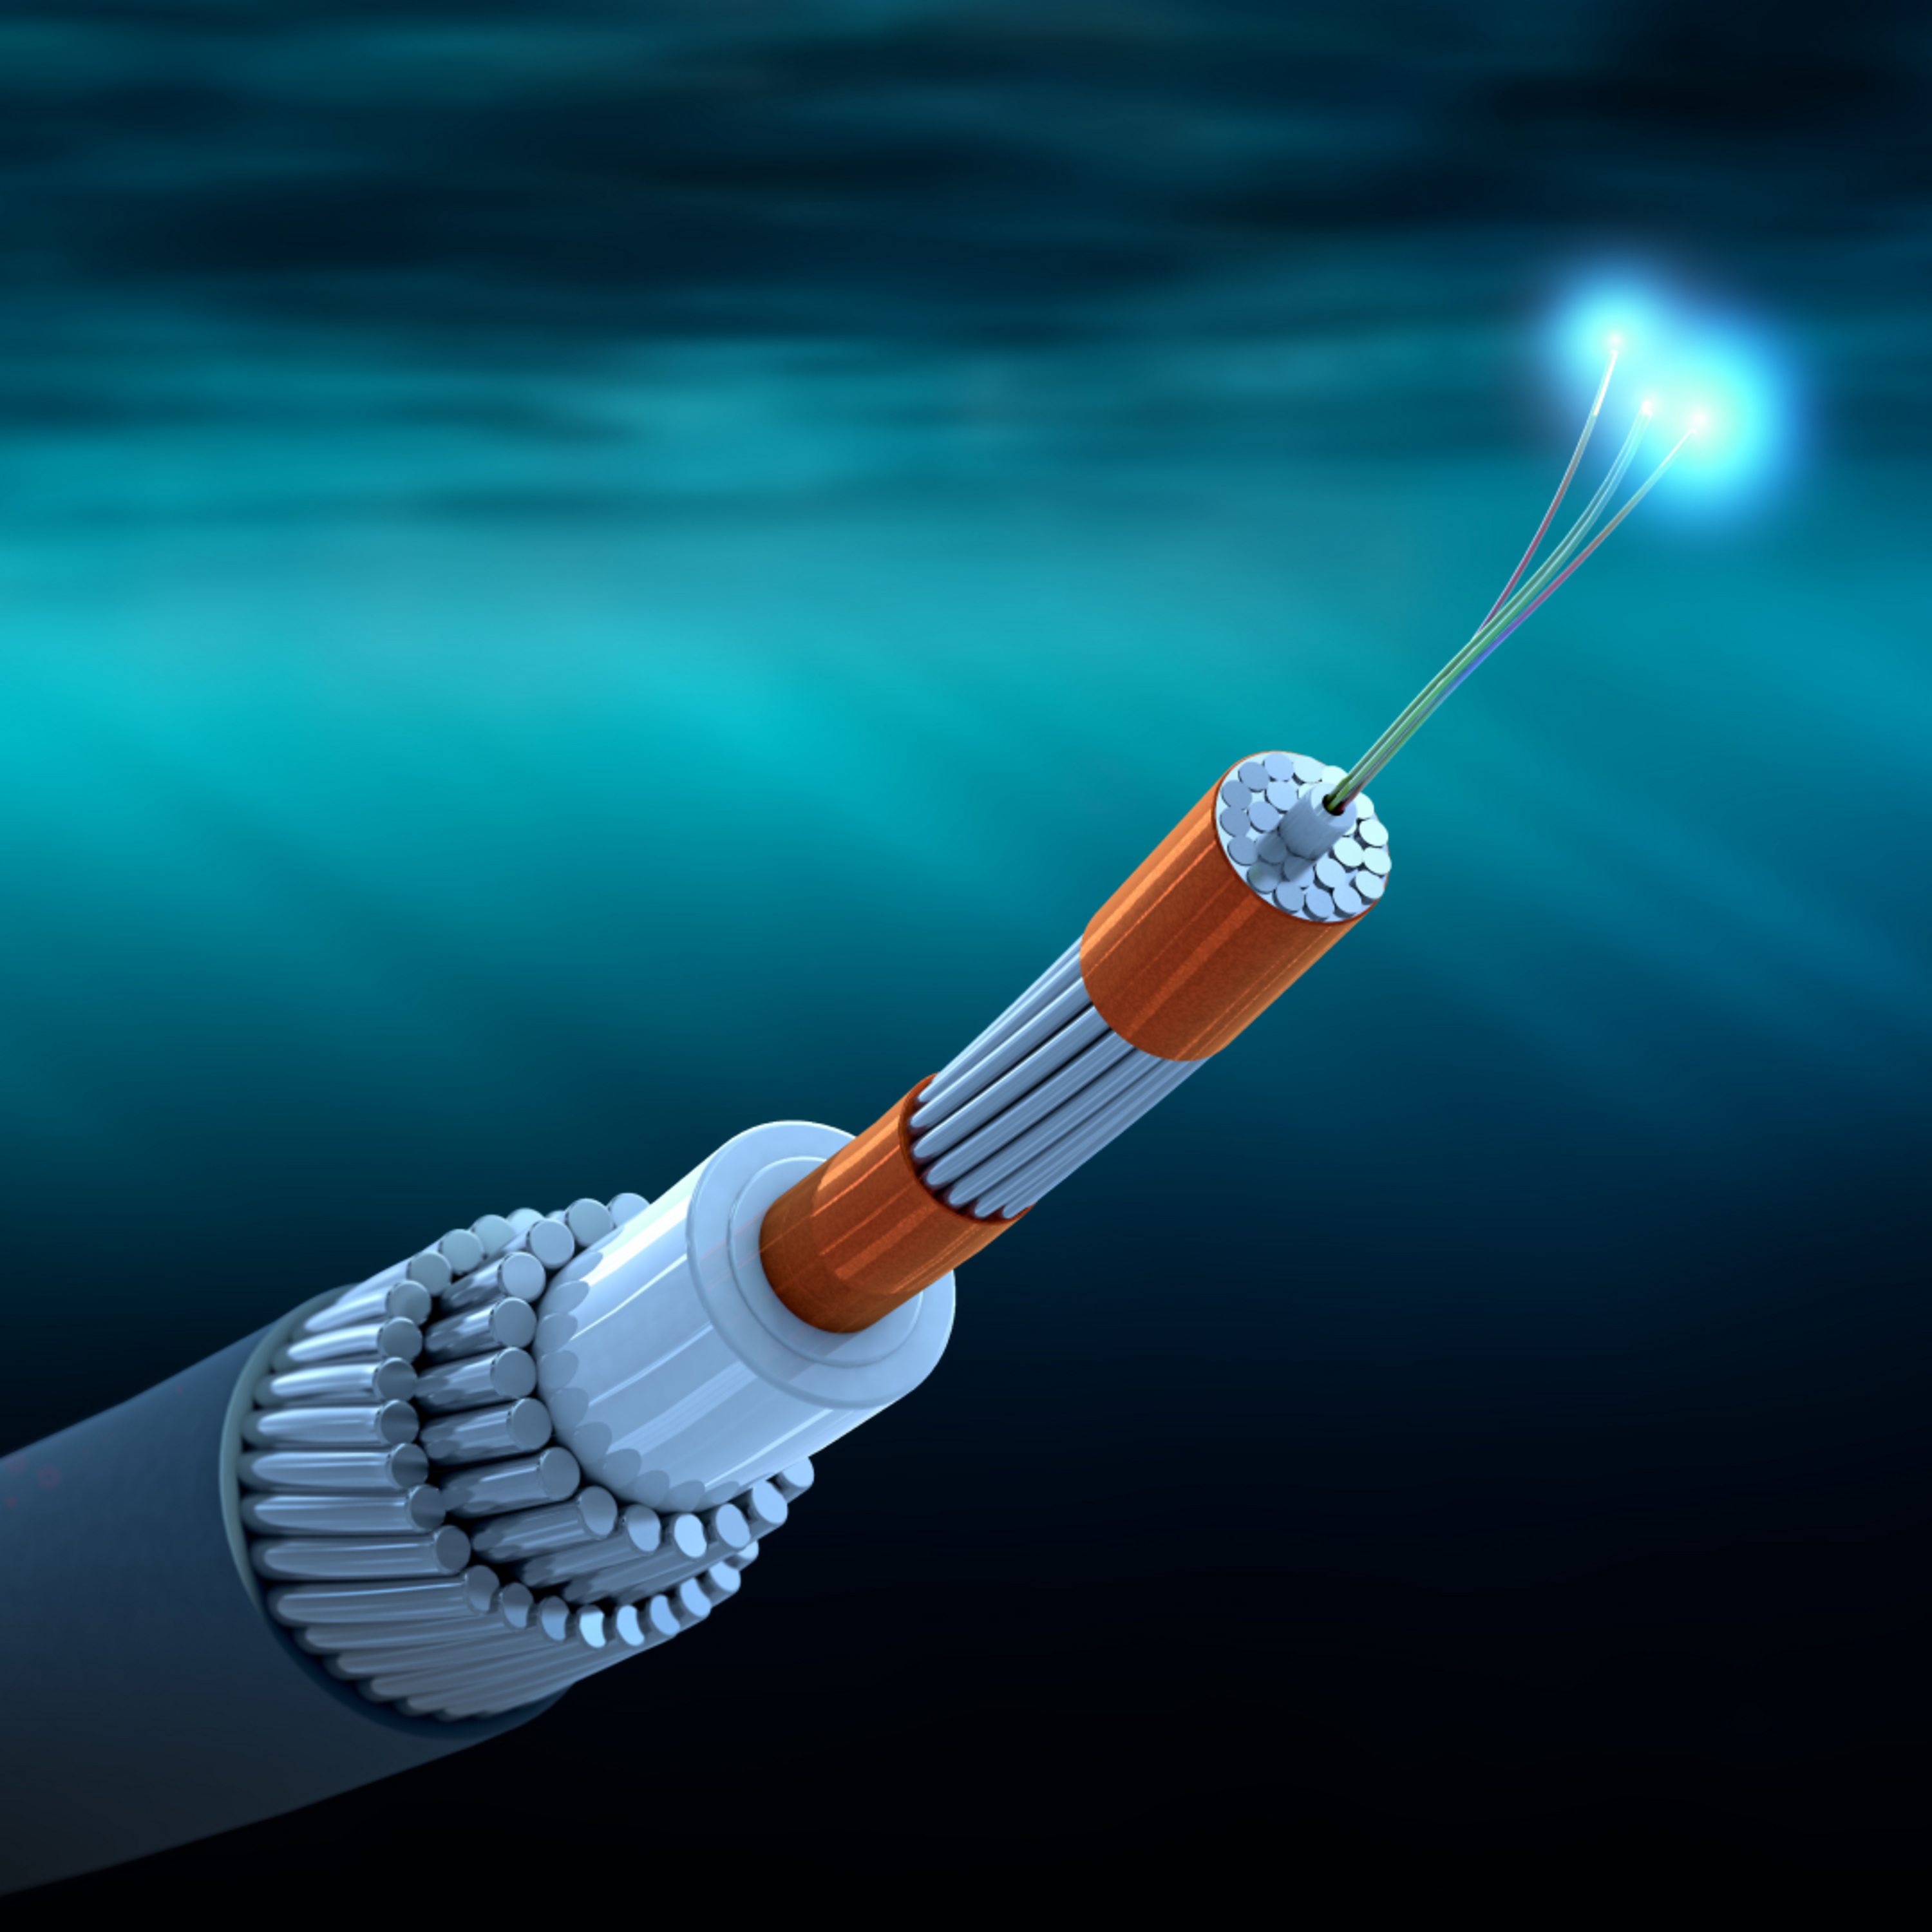 Fixing undersea cables